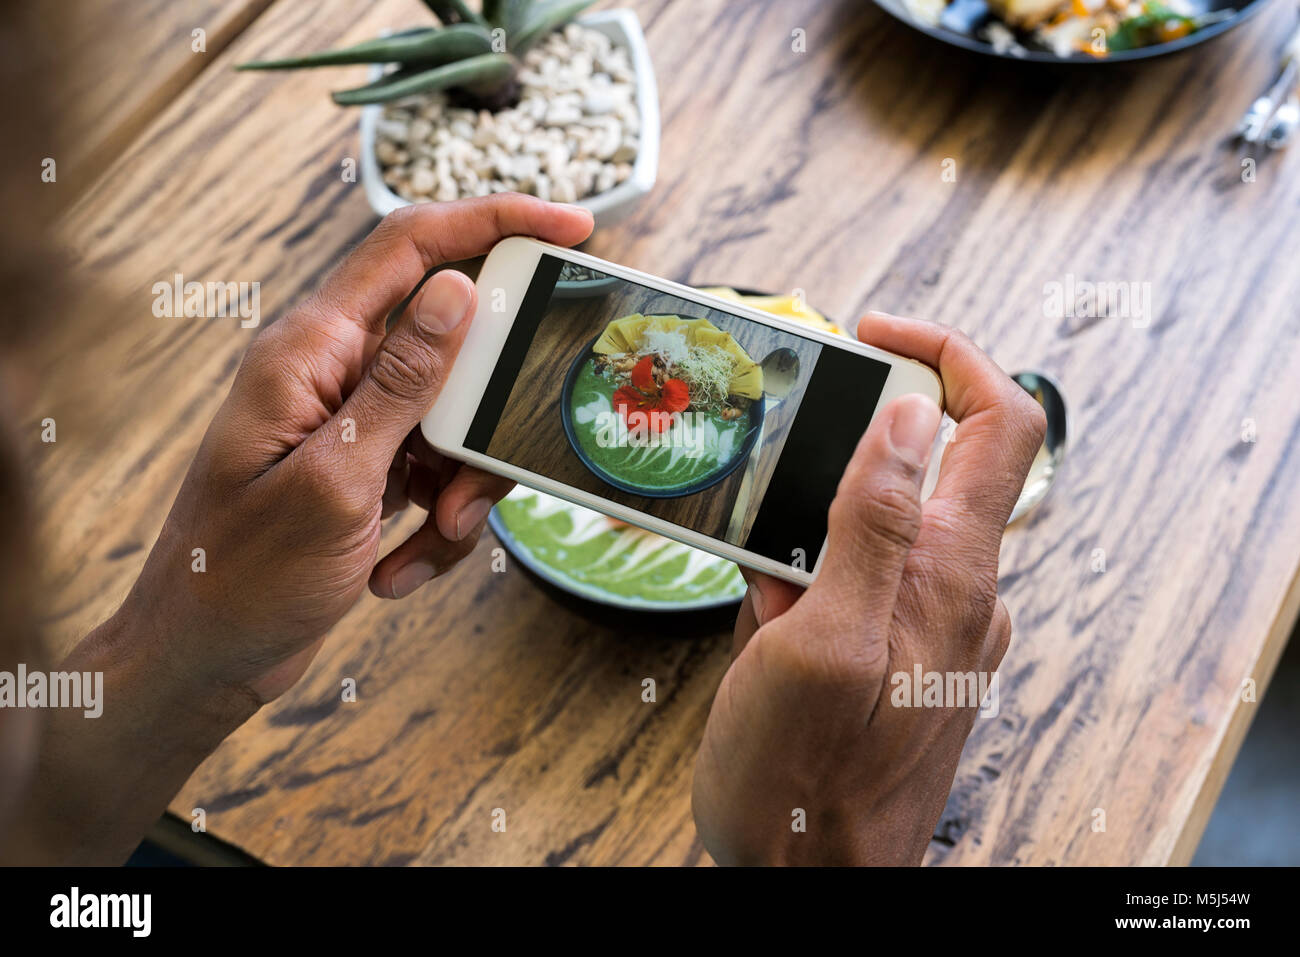 Male hands taking a picture of smoothie bowl with smartphone Stock Photo